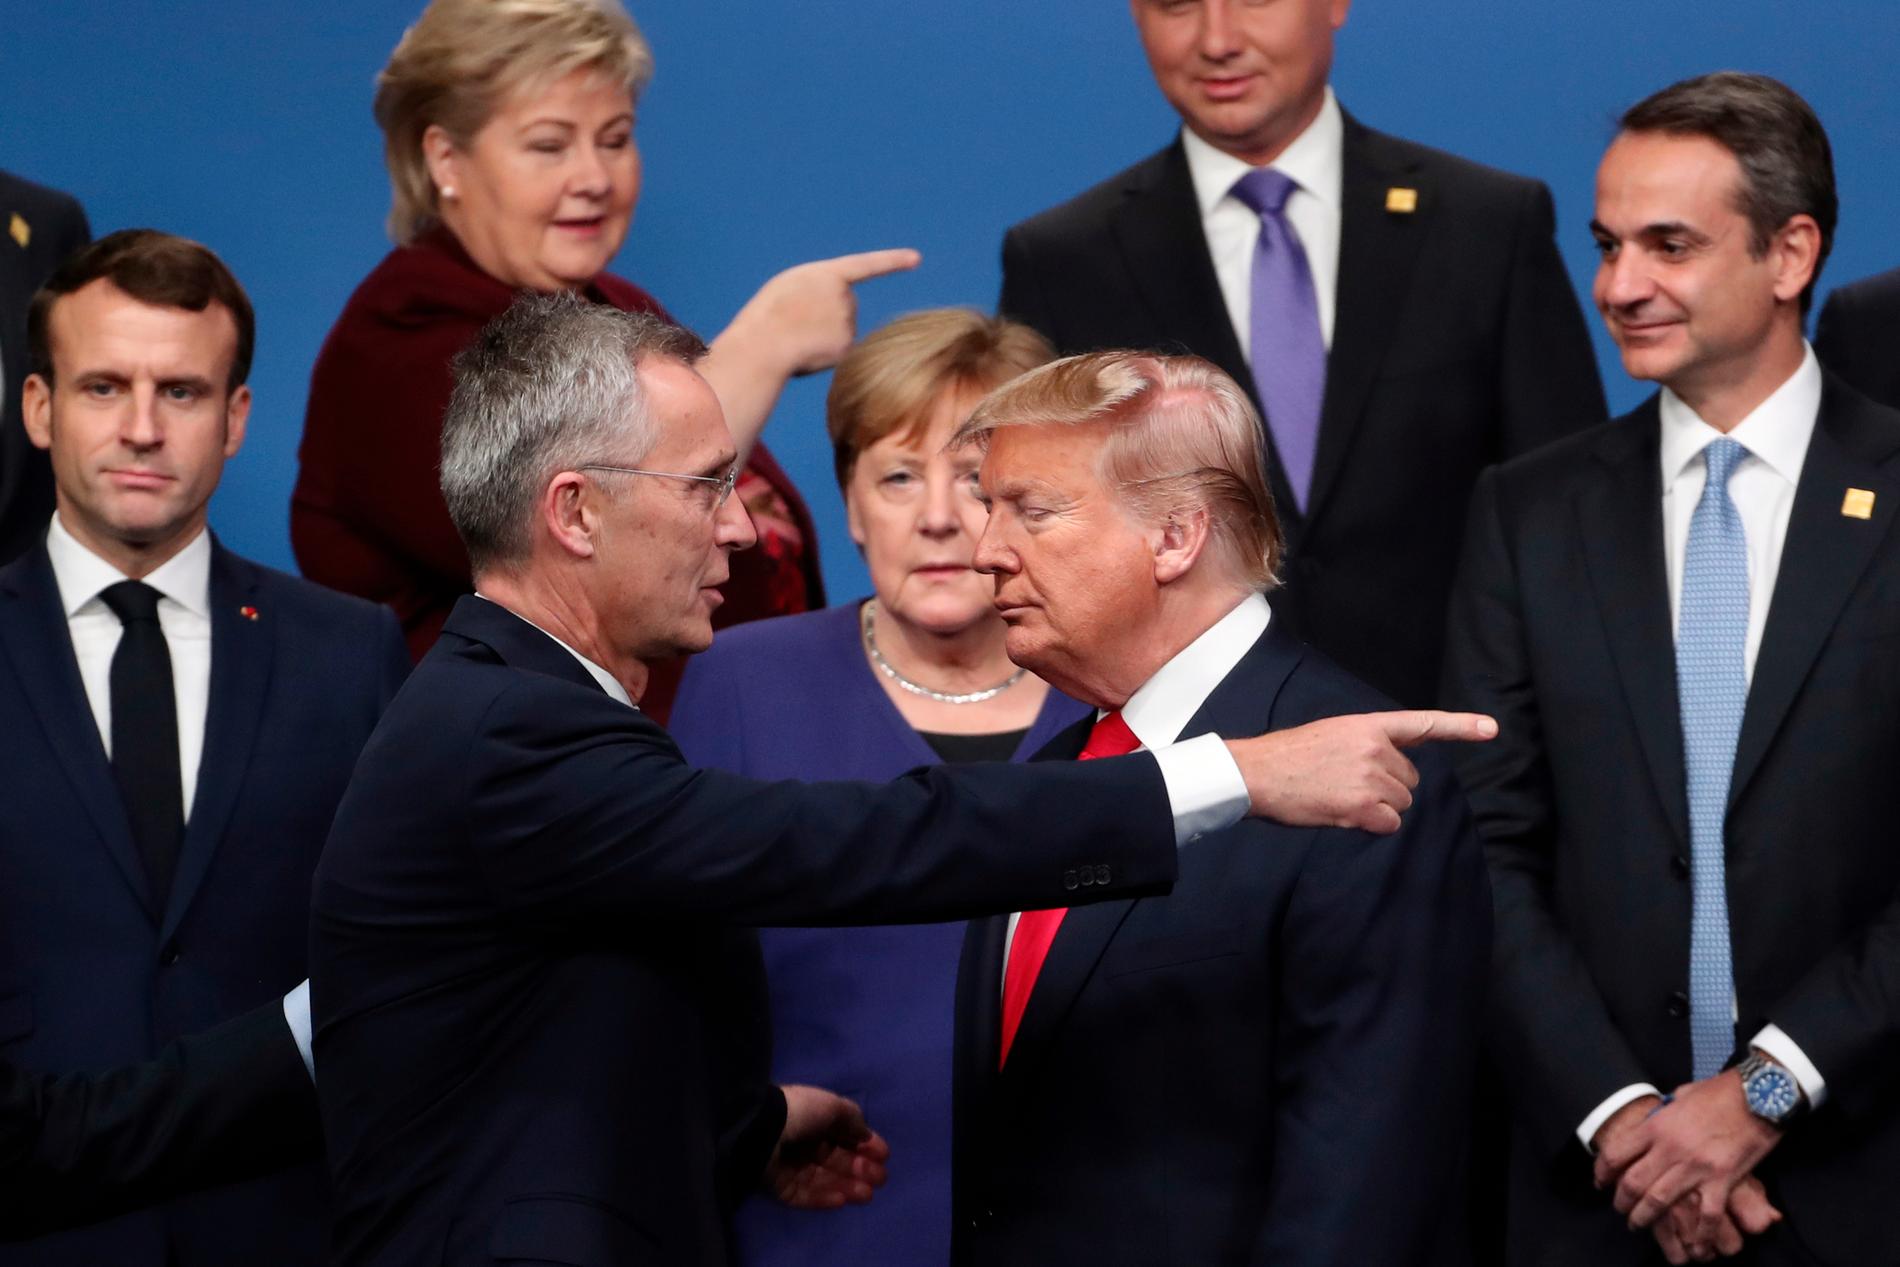 He went his own way: Donald Trump during the NATO summit